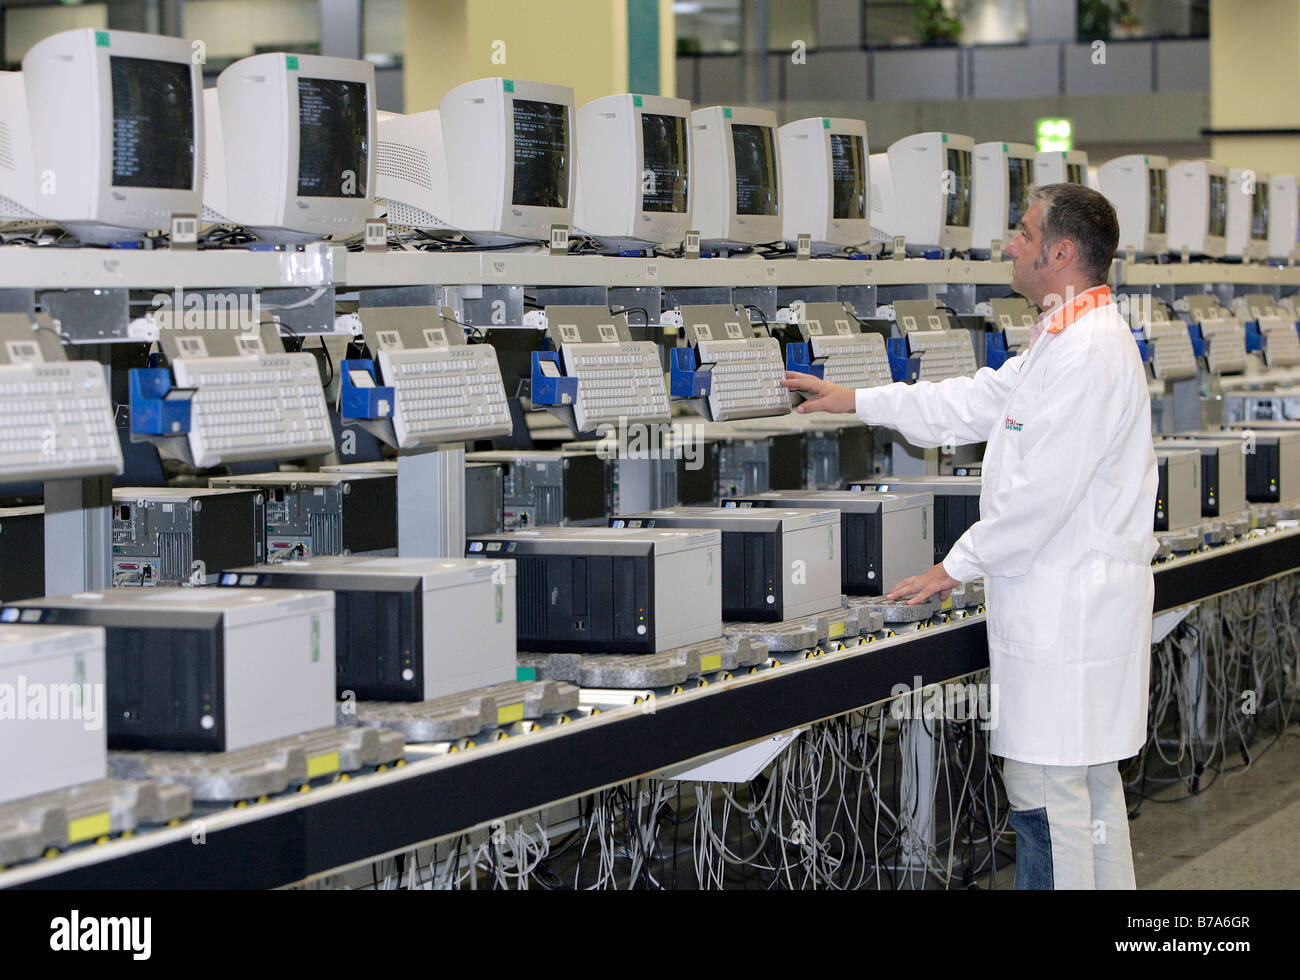 Employee of the computer production at the function test, final inspection of a PC at the Fujitsu Siemens GmbH in Augsburg, Bav Stock Photo